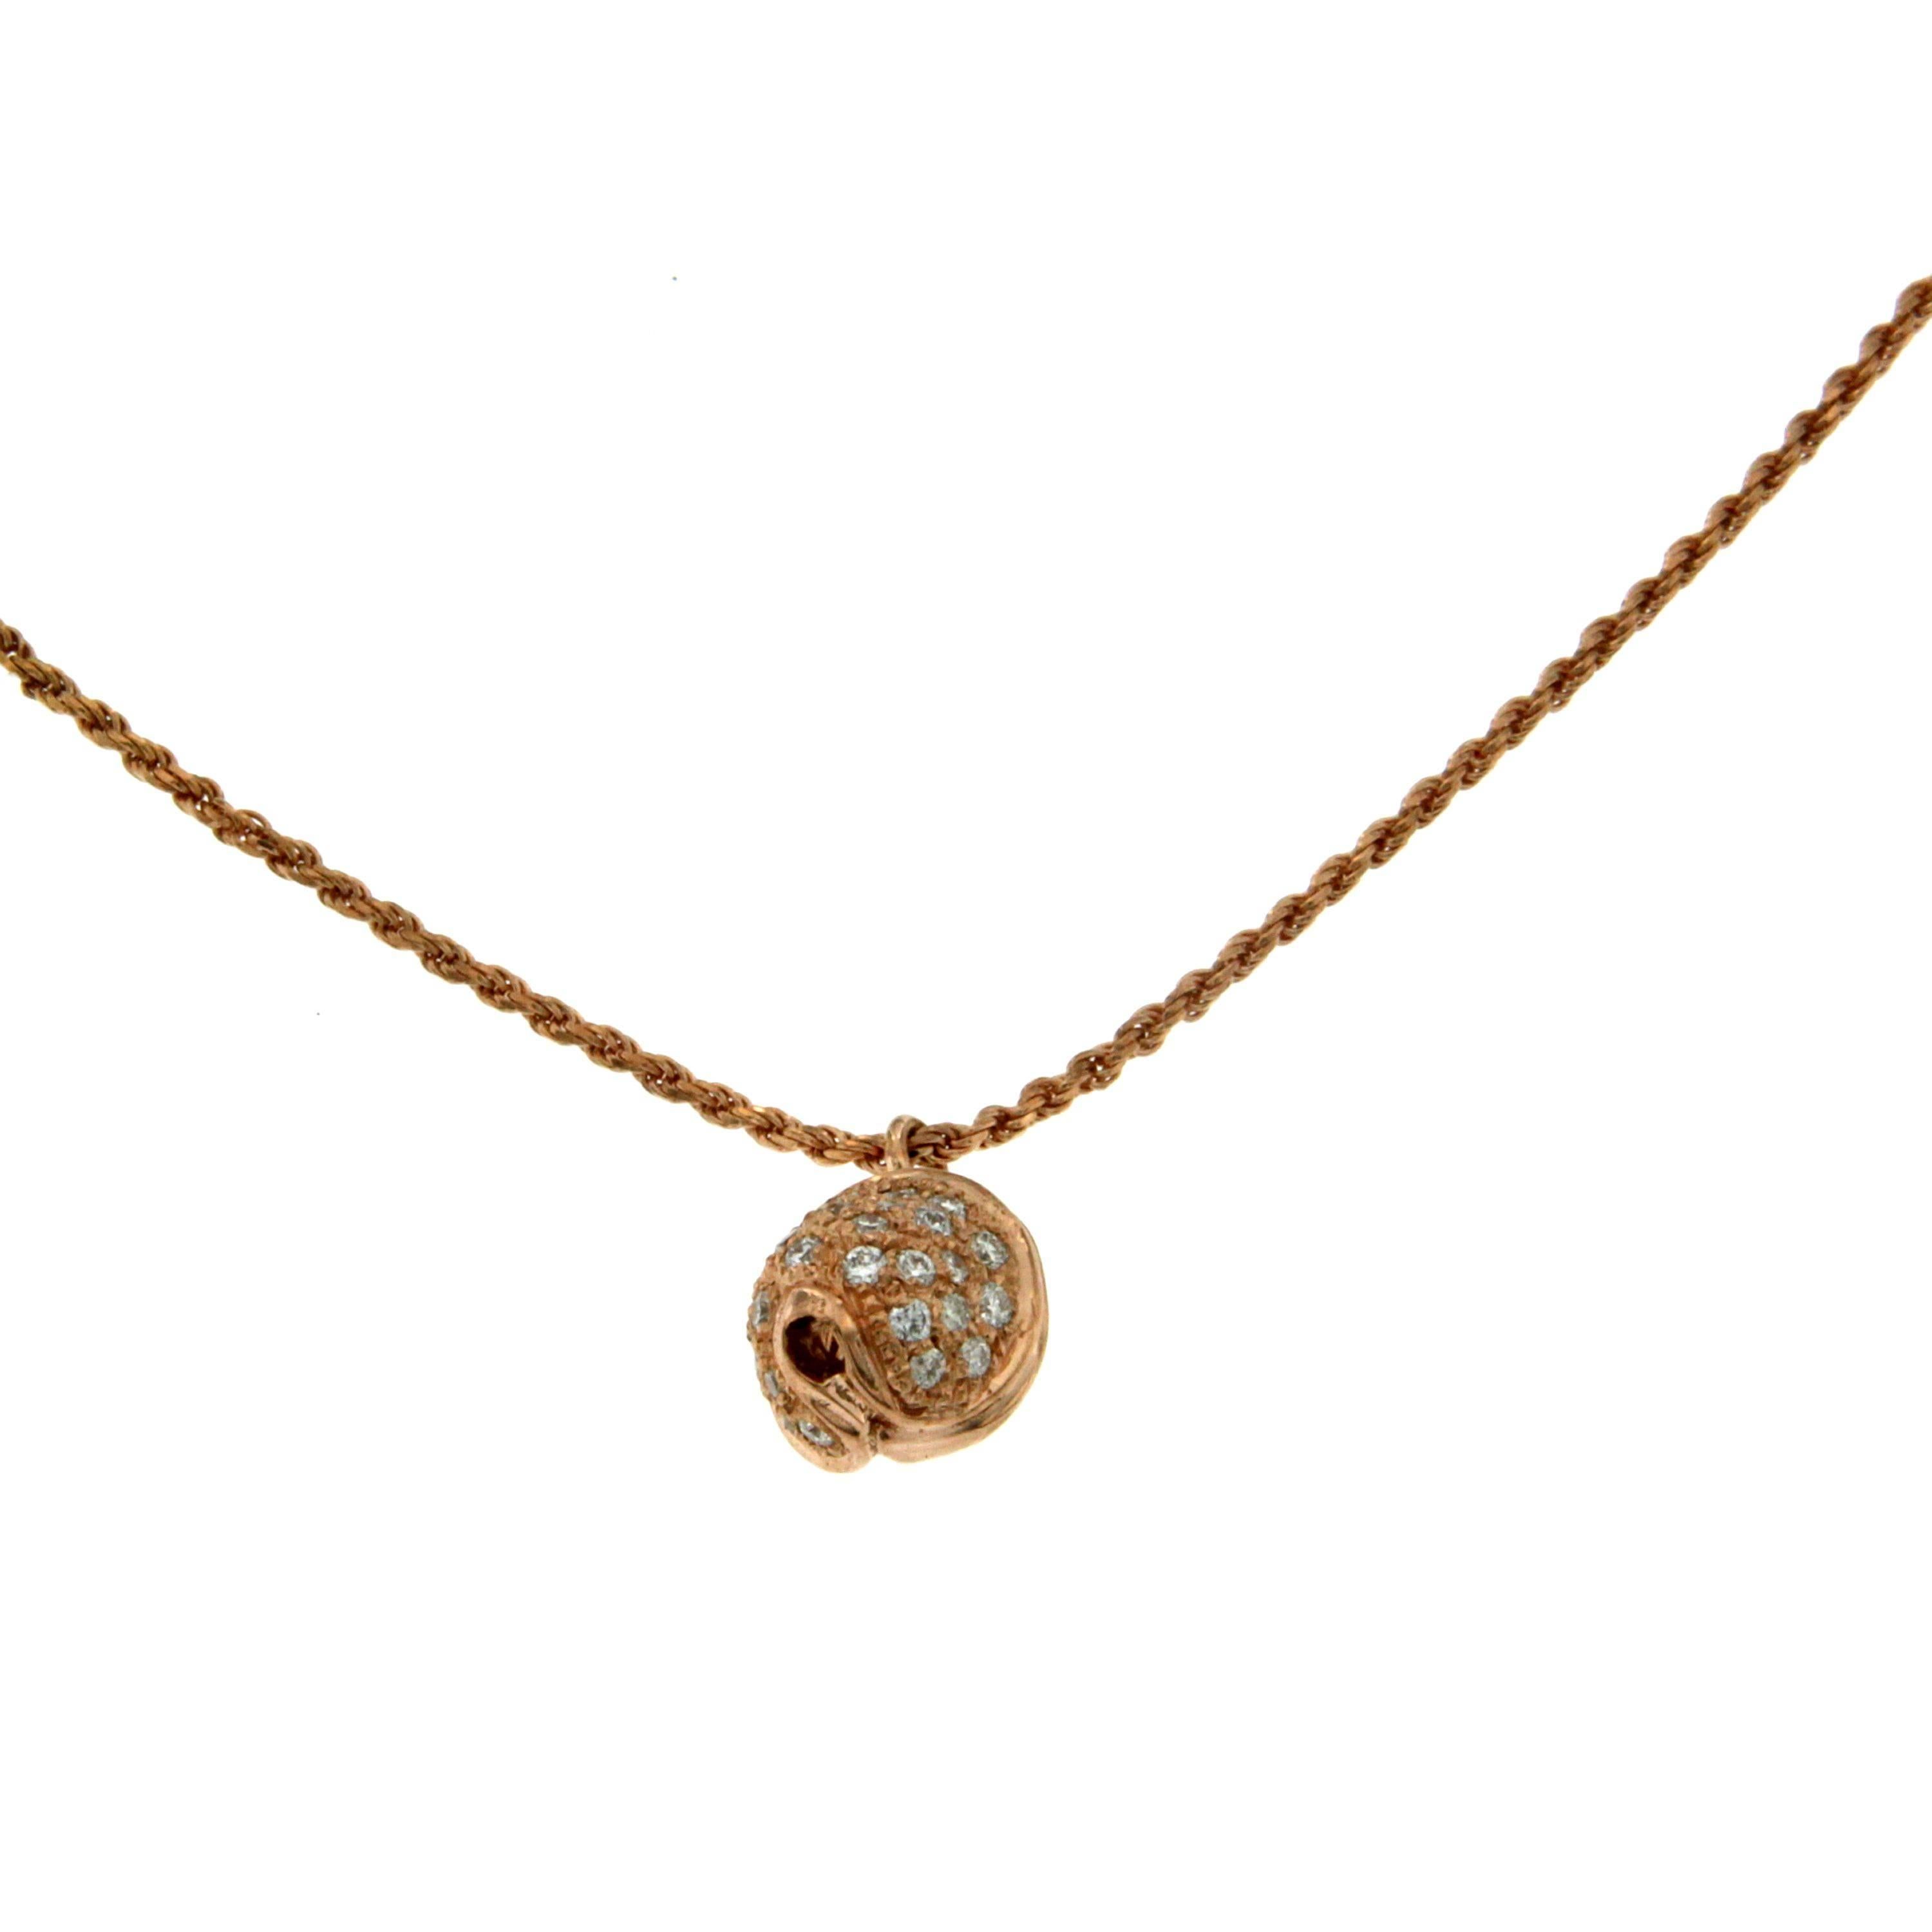 This sophisticated and adorable pendant is rendered in 18k Rose Gold with 0.30 ct of sparkling diamonds.
Chain Length can be made to any size.

This necklace is from our own production. It can be ordered upon request, choosing the Diamond, Gold